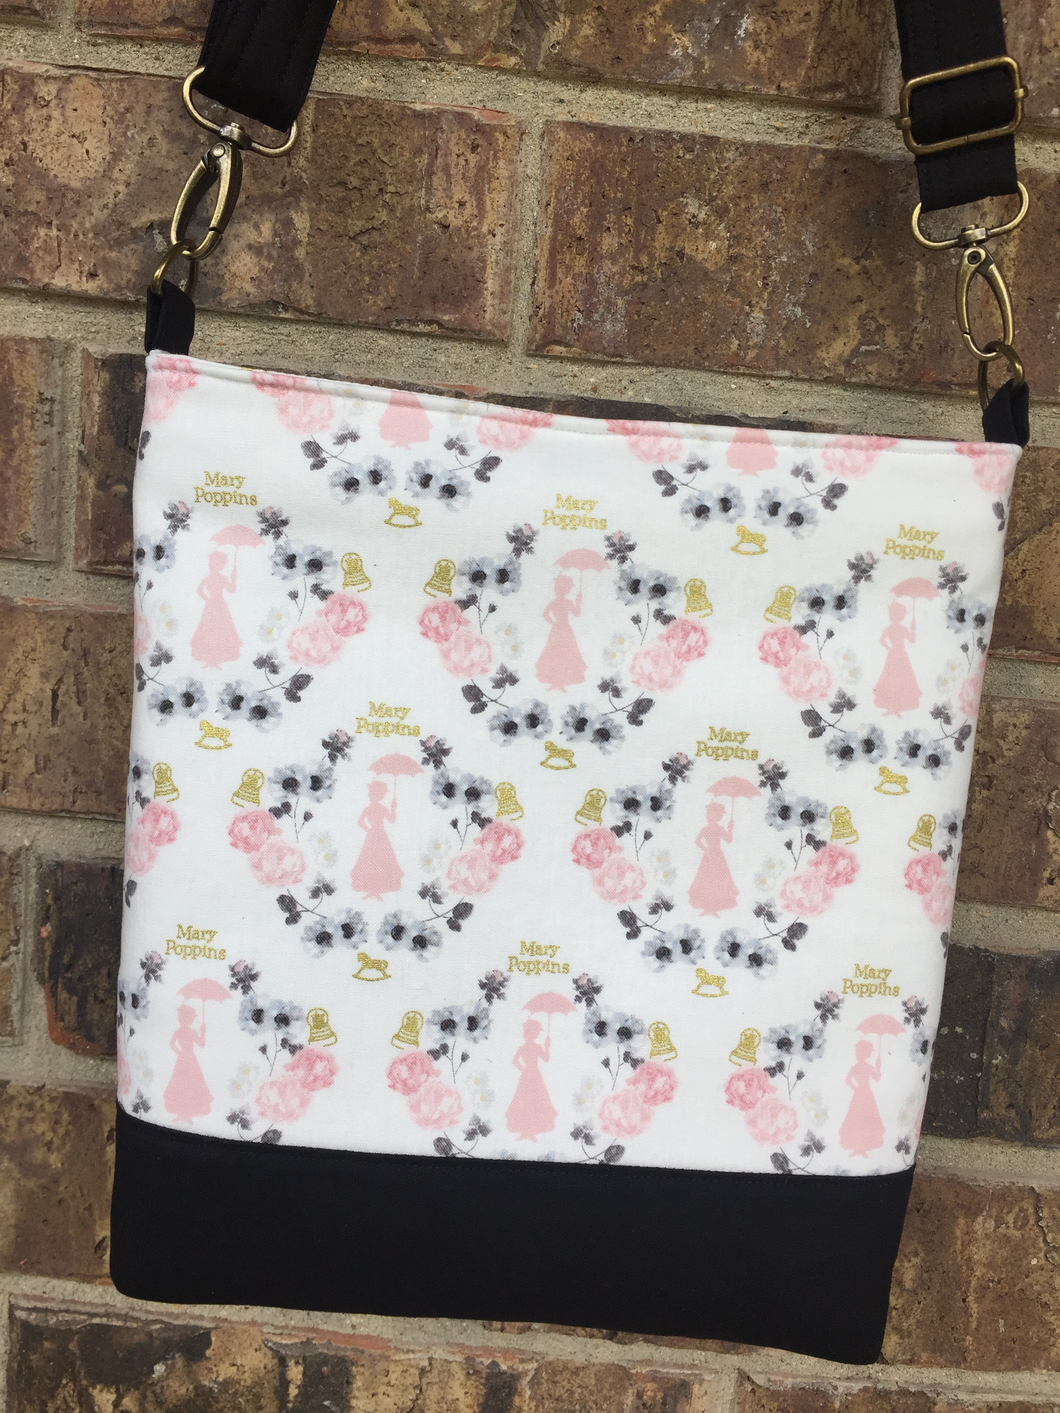 Messenger Bag Made With Licensed Spoonful Of Sugar Nanny Fabric - Adjustable Strap - Zippered Closure - Zippered Pocket - Cross Body Bag